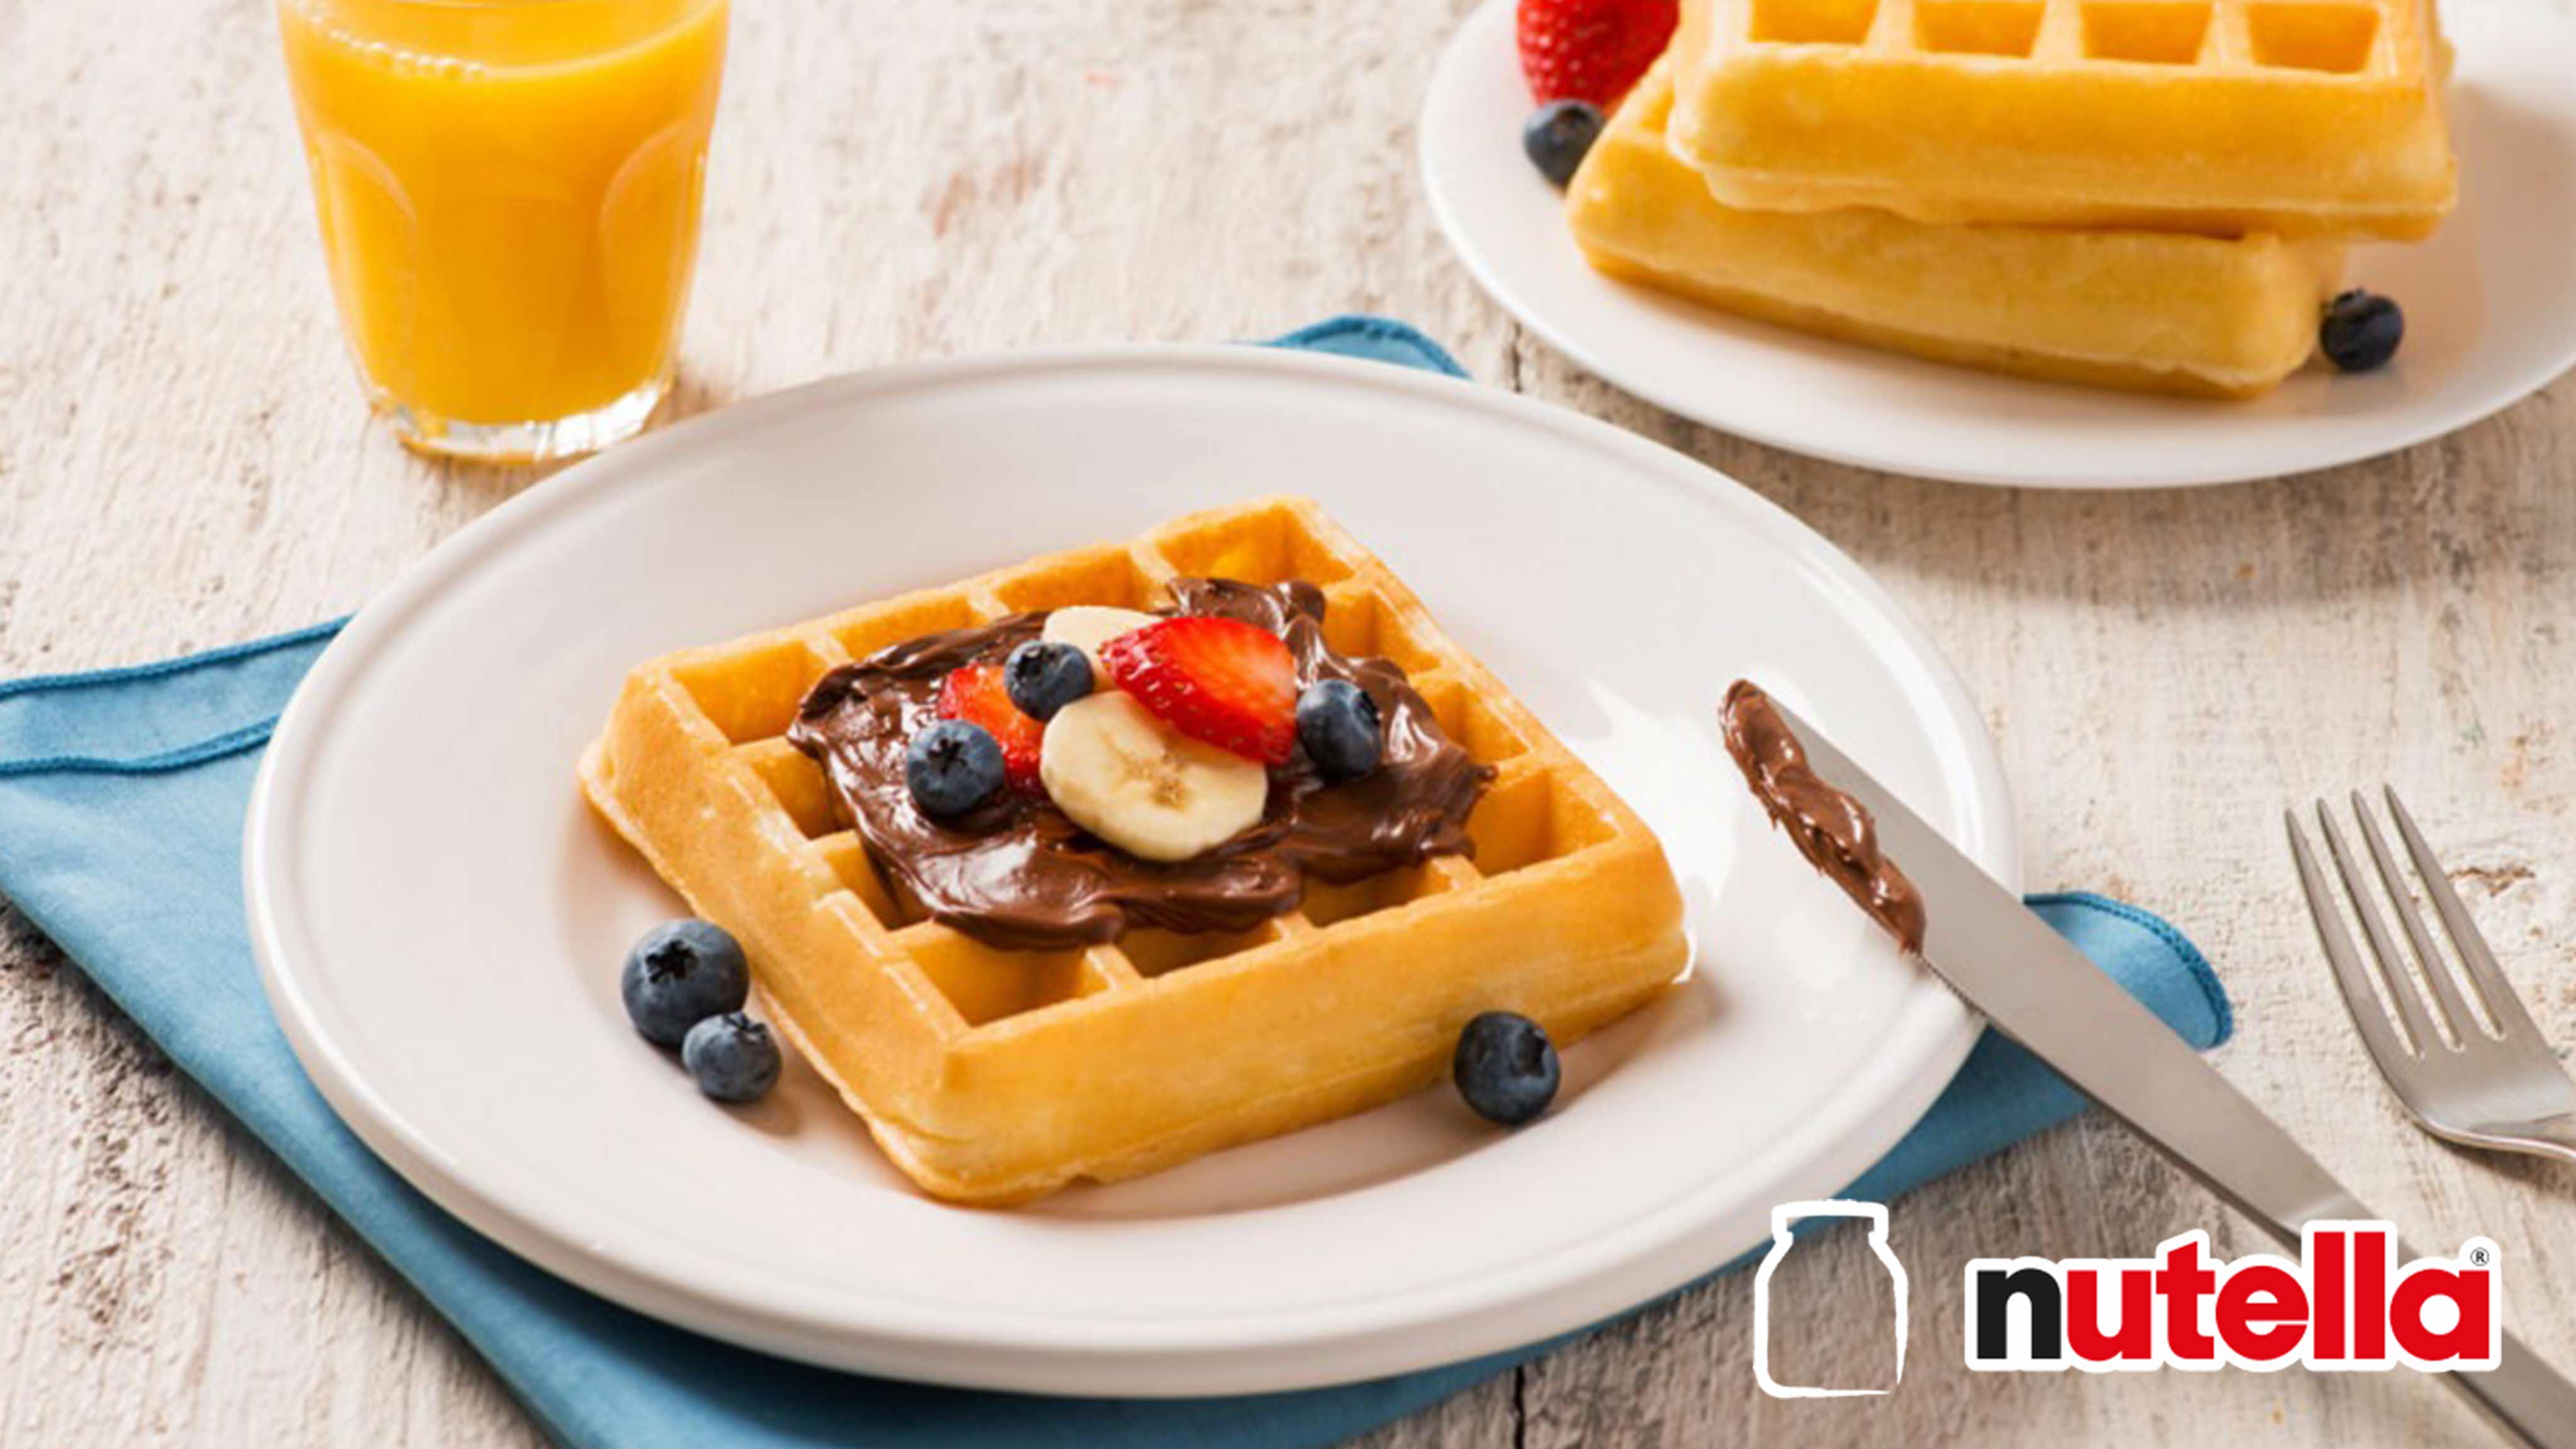 Image for Recipe Waffles with Nutella® hazelnut spread and Fruit